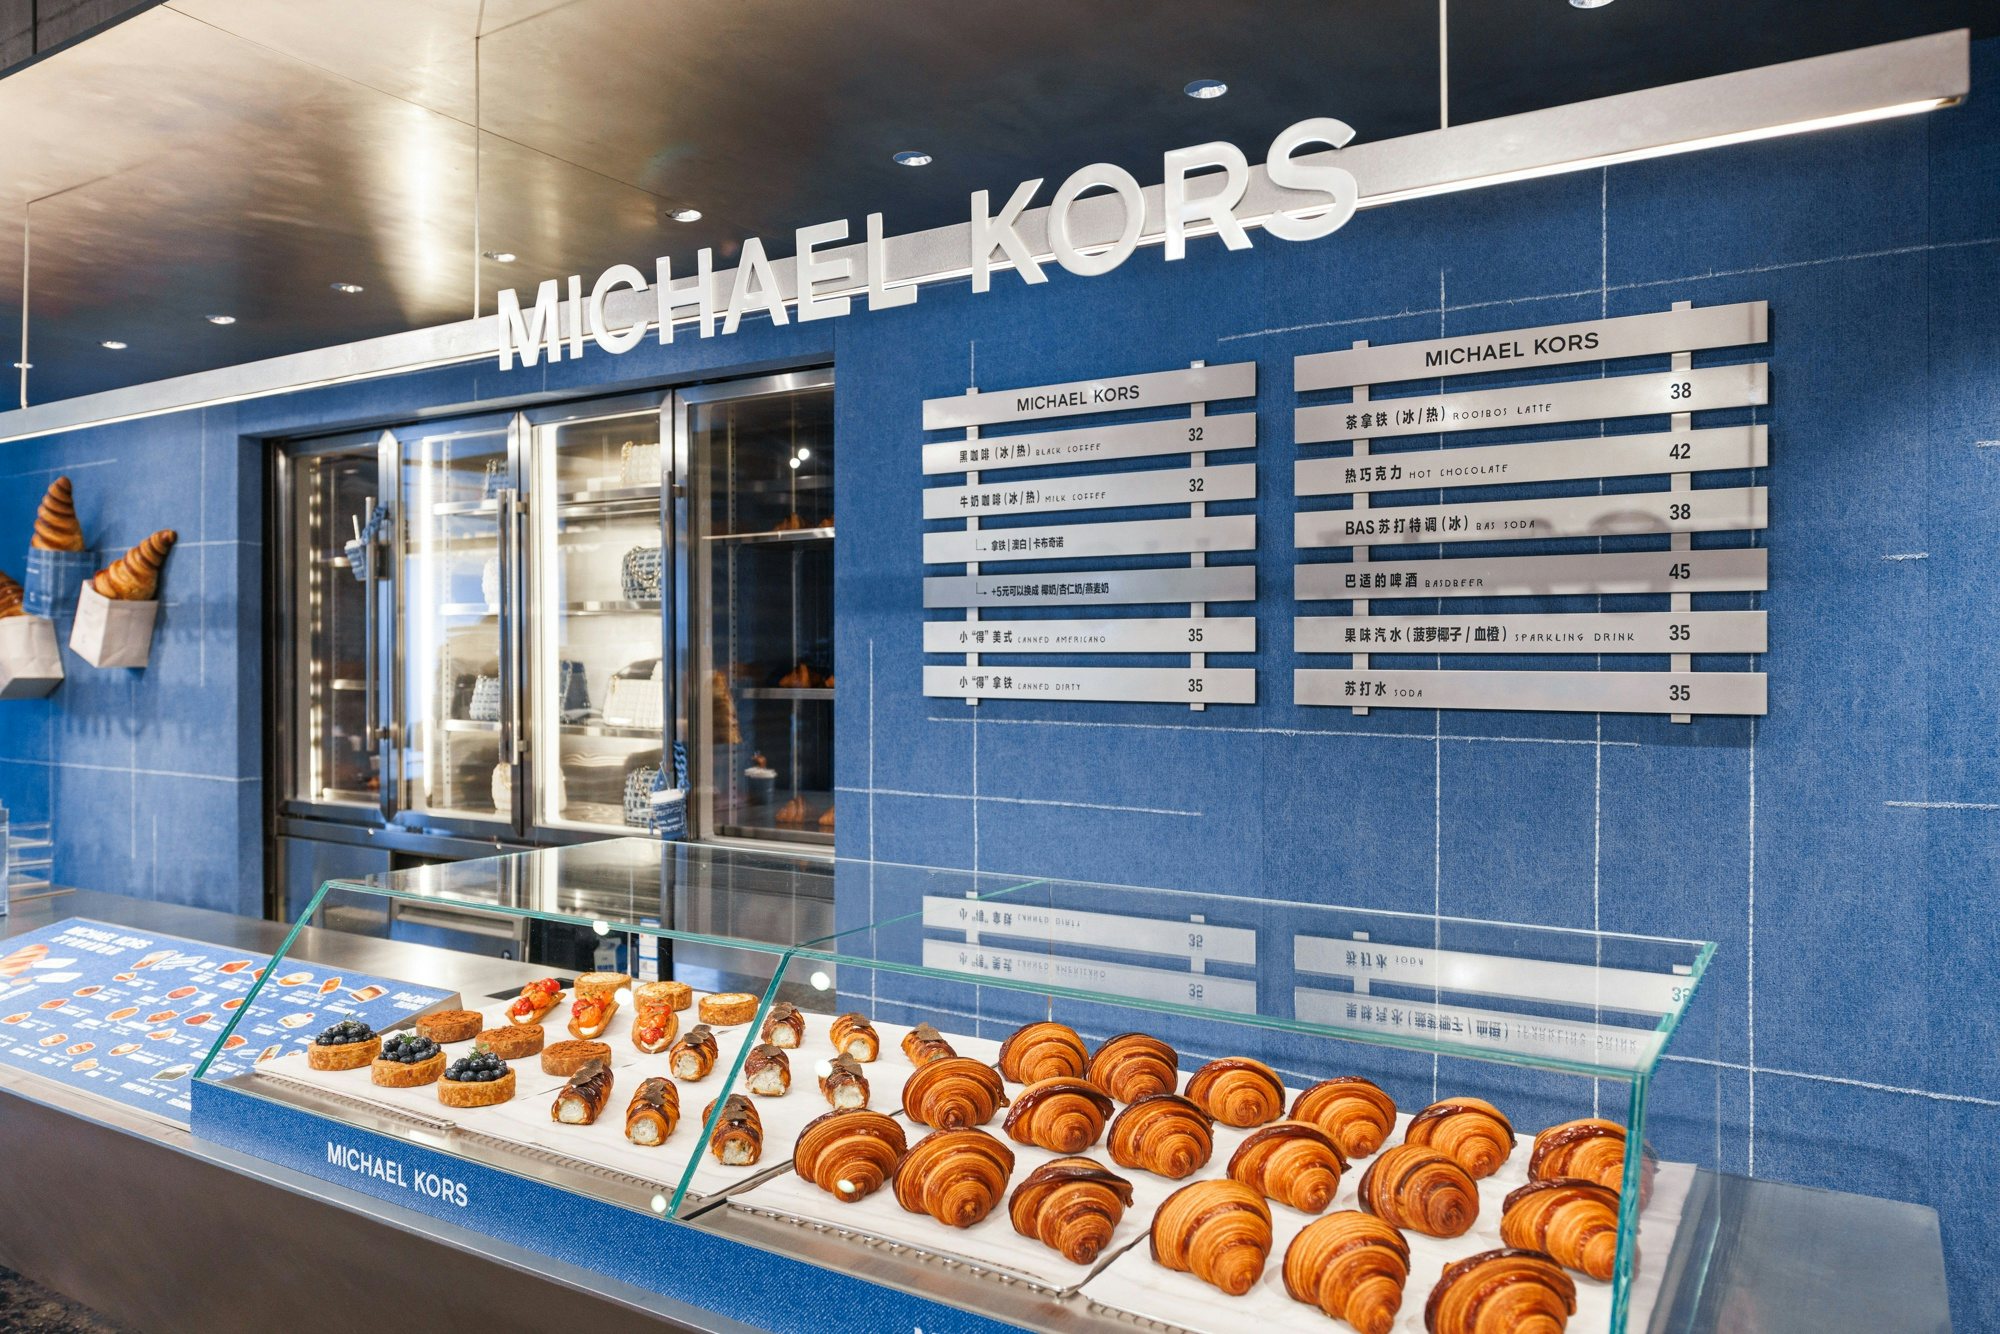 Located on Yuyuan Road in one of Shanghai’s hippest neighborhoods, Basdban is renowned for its delectable croissants. Photo: Michael Kors